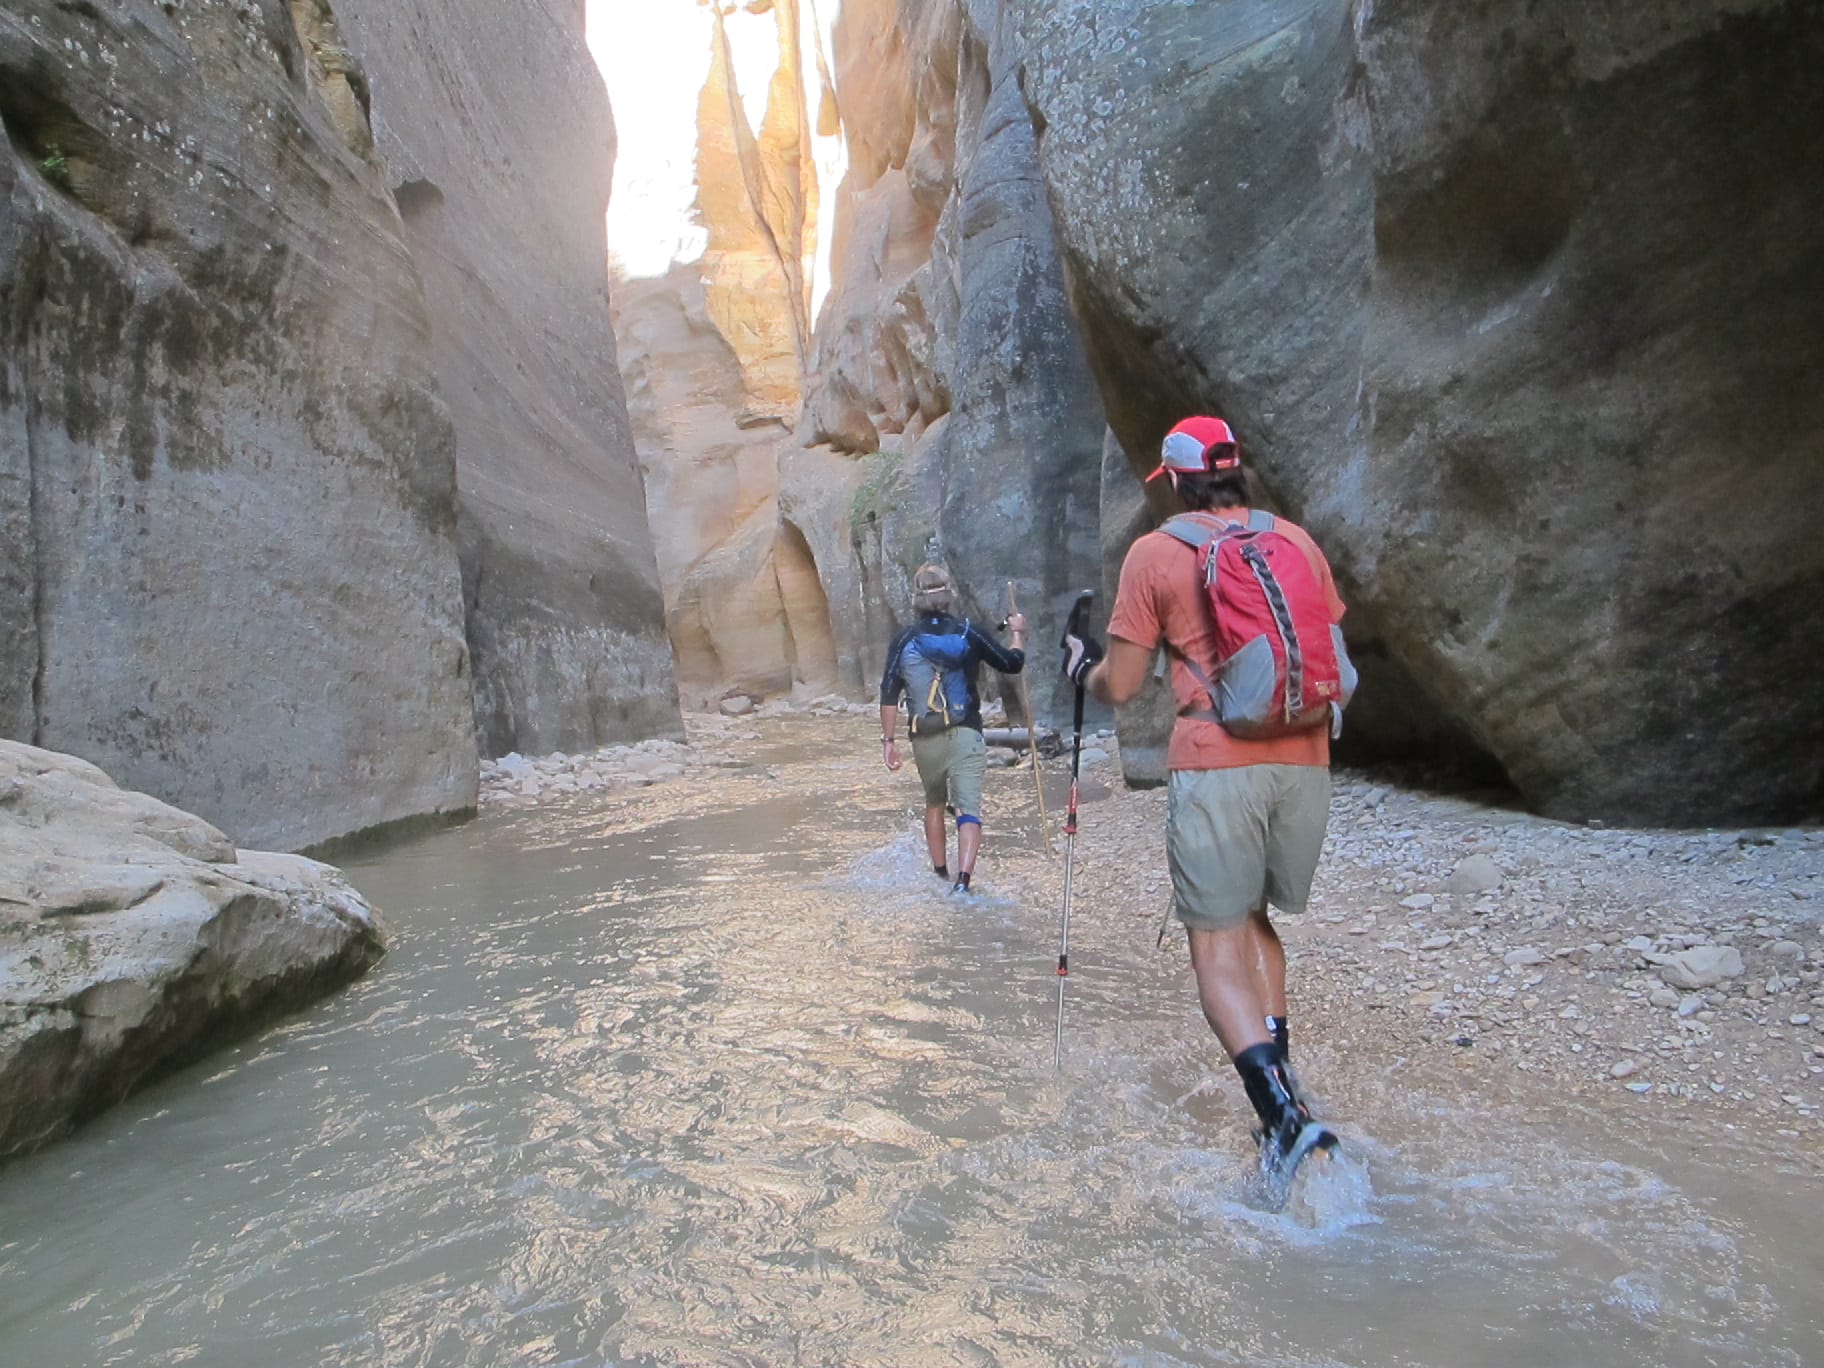 Two people hiking through a narrow canyon.